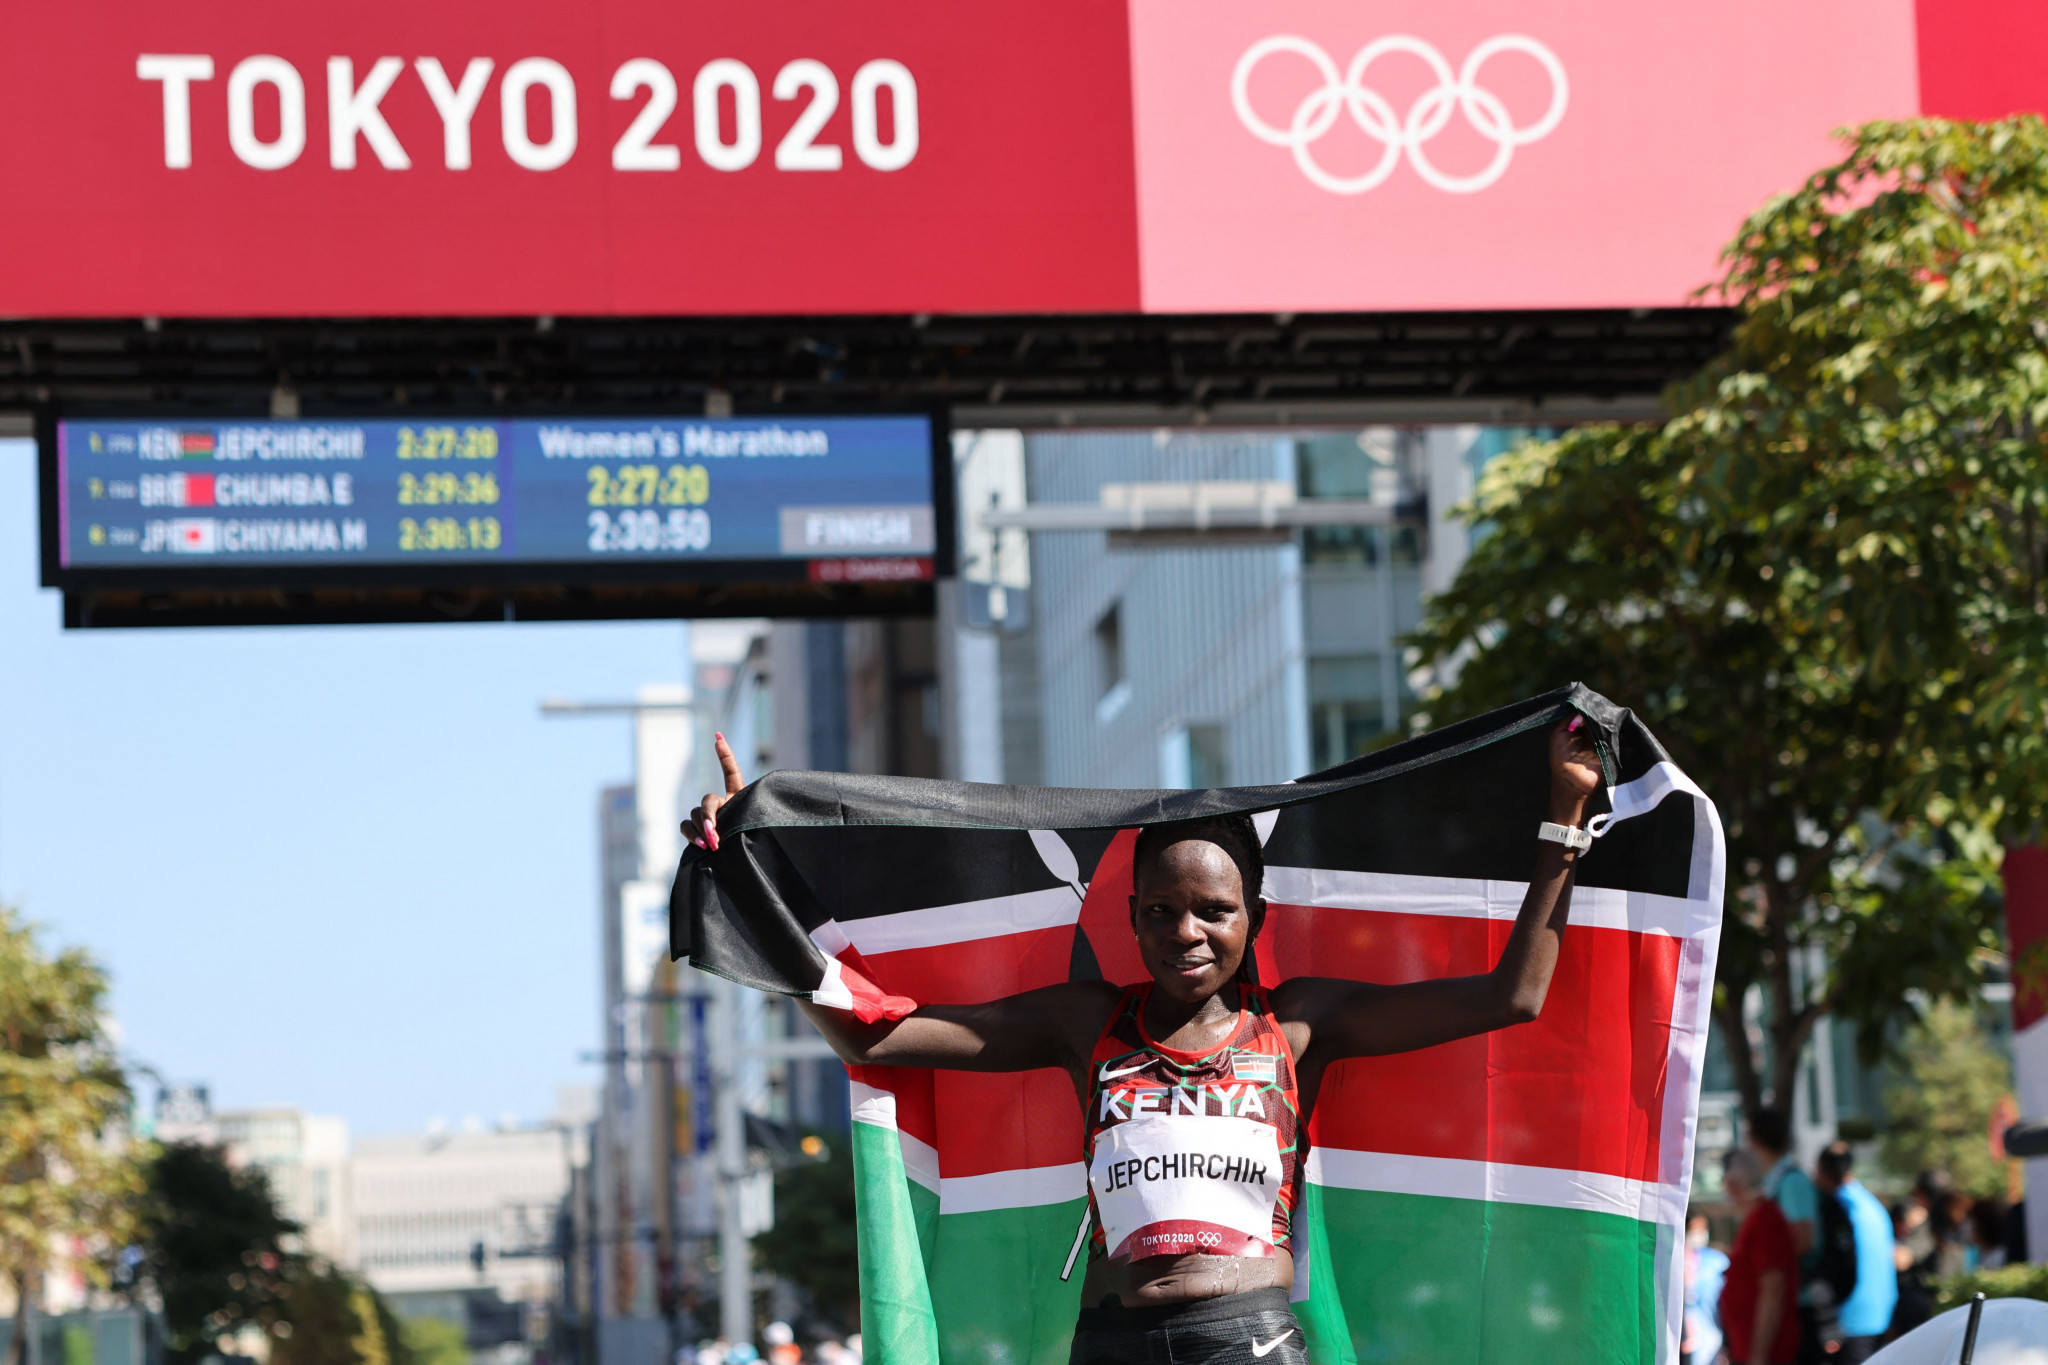 Marathon runner Peres Jepchirchir won one of Kenya's four Olympic gold medals at Tokyo 2020 - making them Africa's most successful nation ©Getty Images